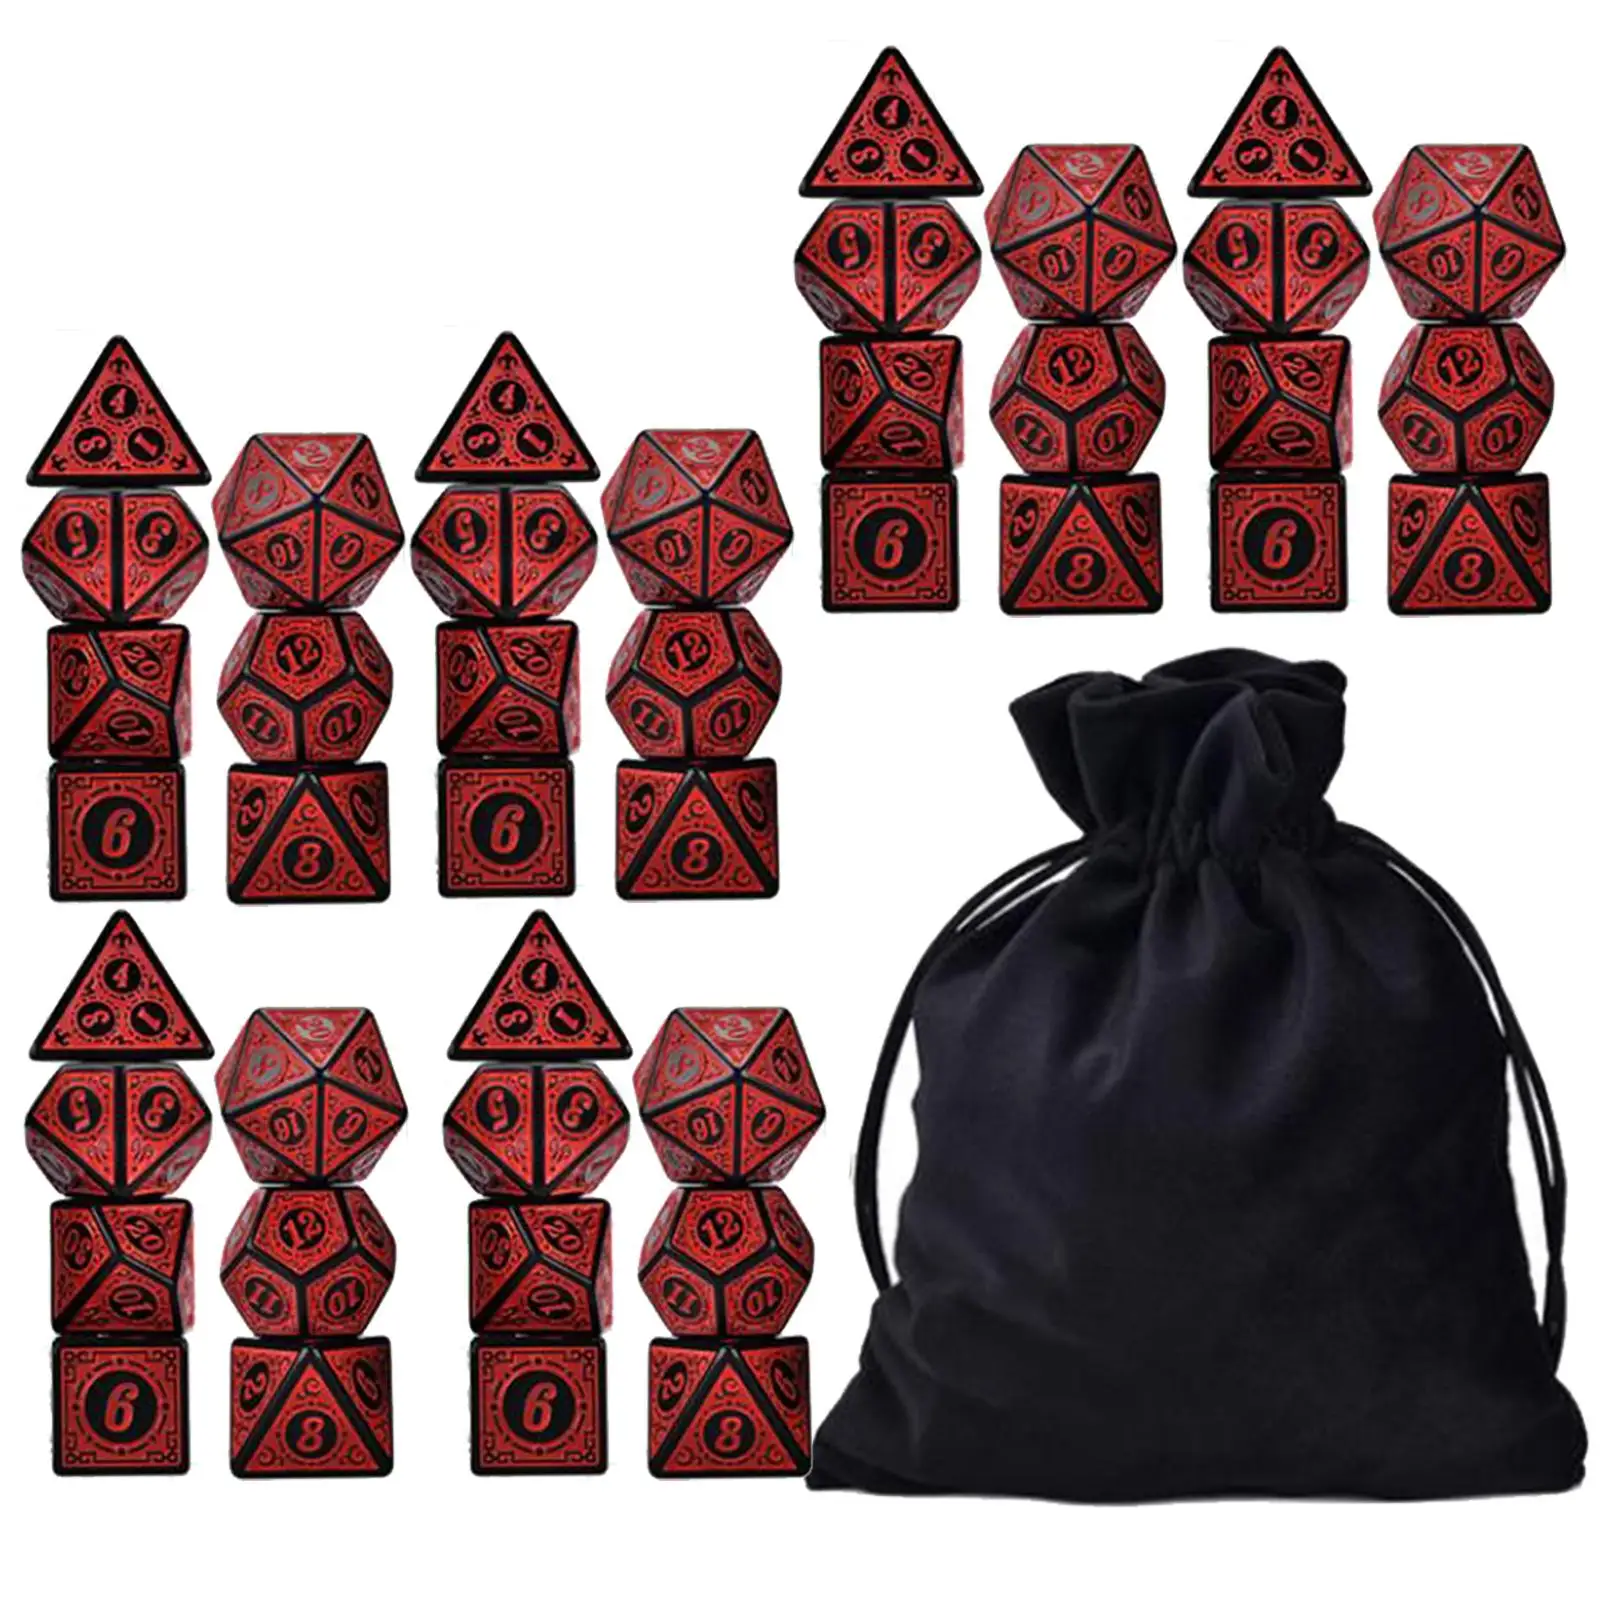 42 Pieces Acrylic Polyhedral Dice Set with Storage Bag D4-D20 for DND MTG Role Playing Bar Toys Math Teaching